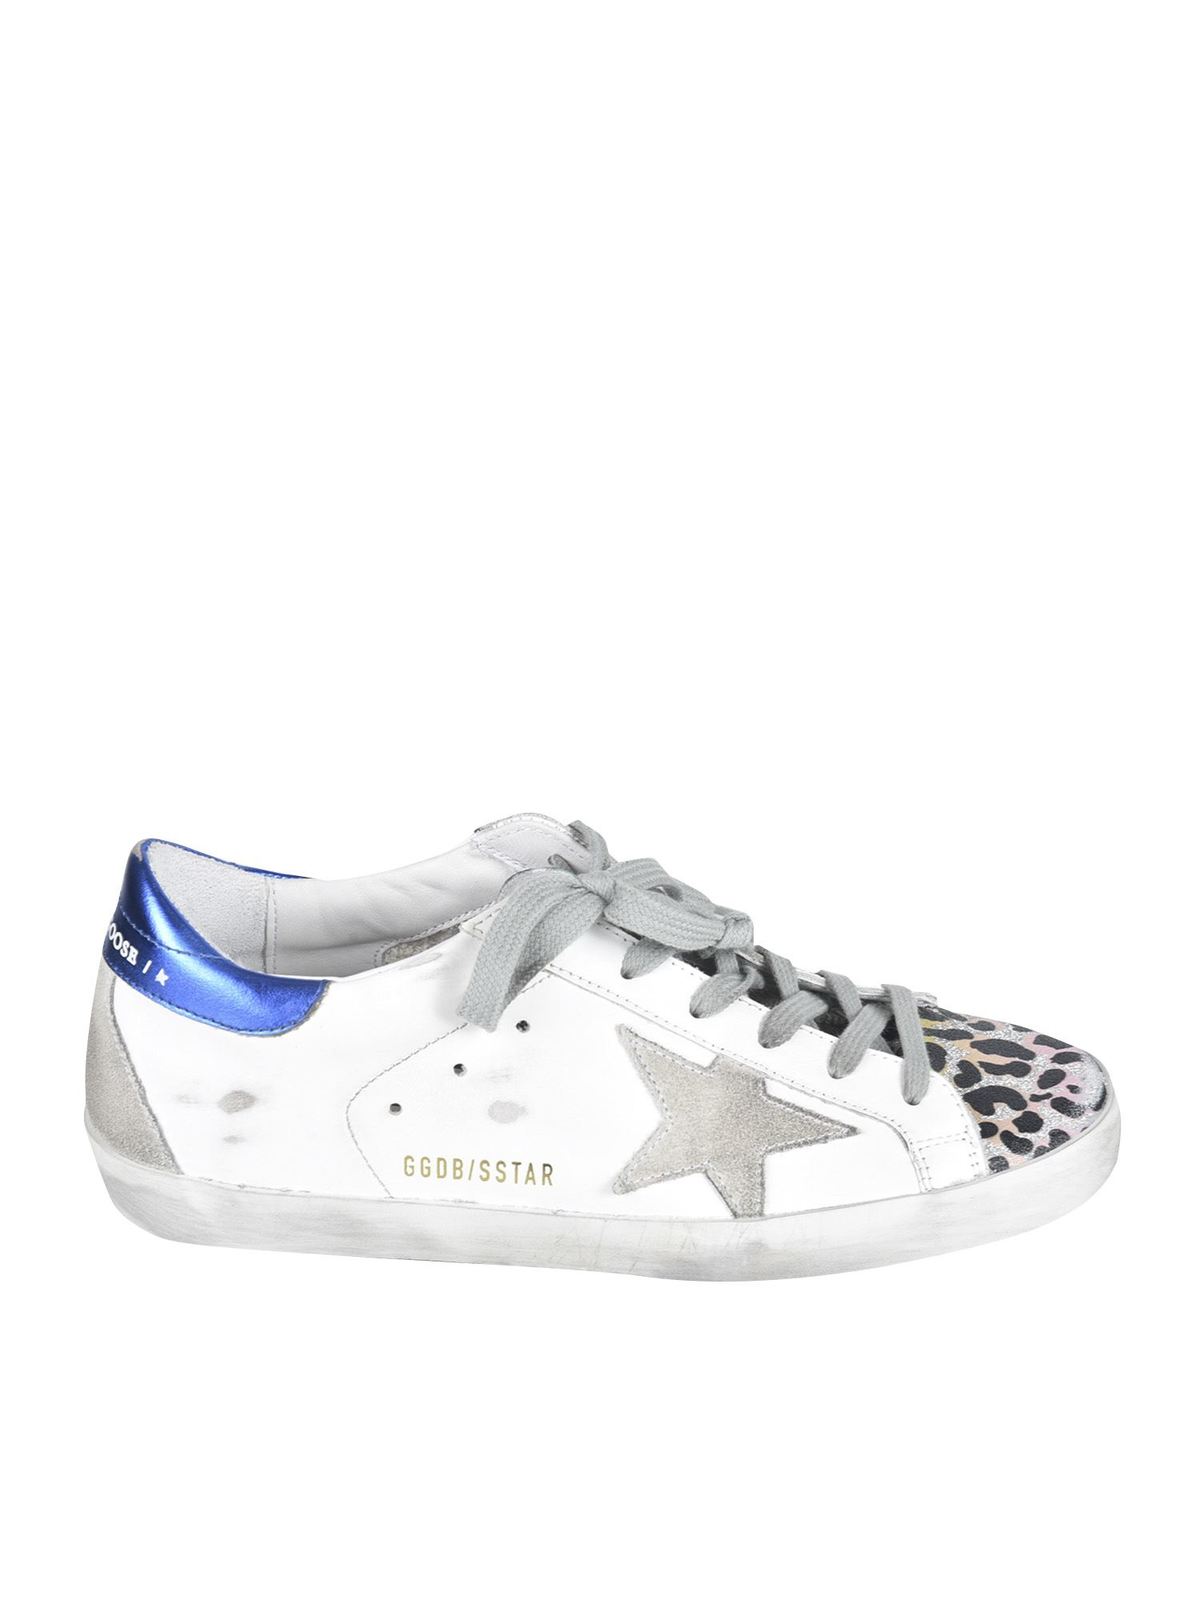 GOLDEN GOOSE SUPERSTAR SNEAKERS IN WHITE AND ANIMALIER